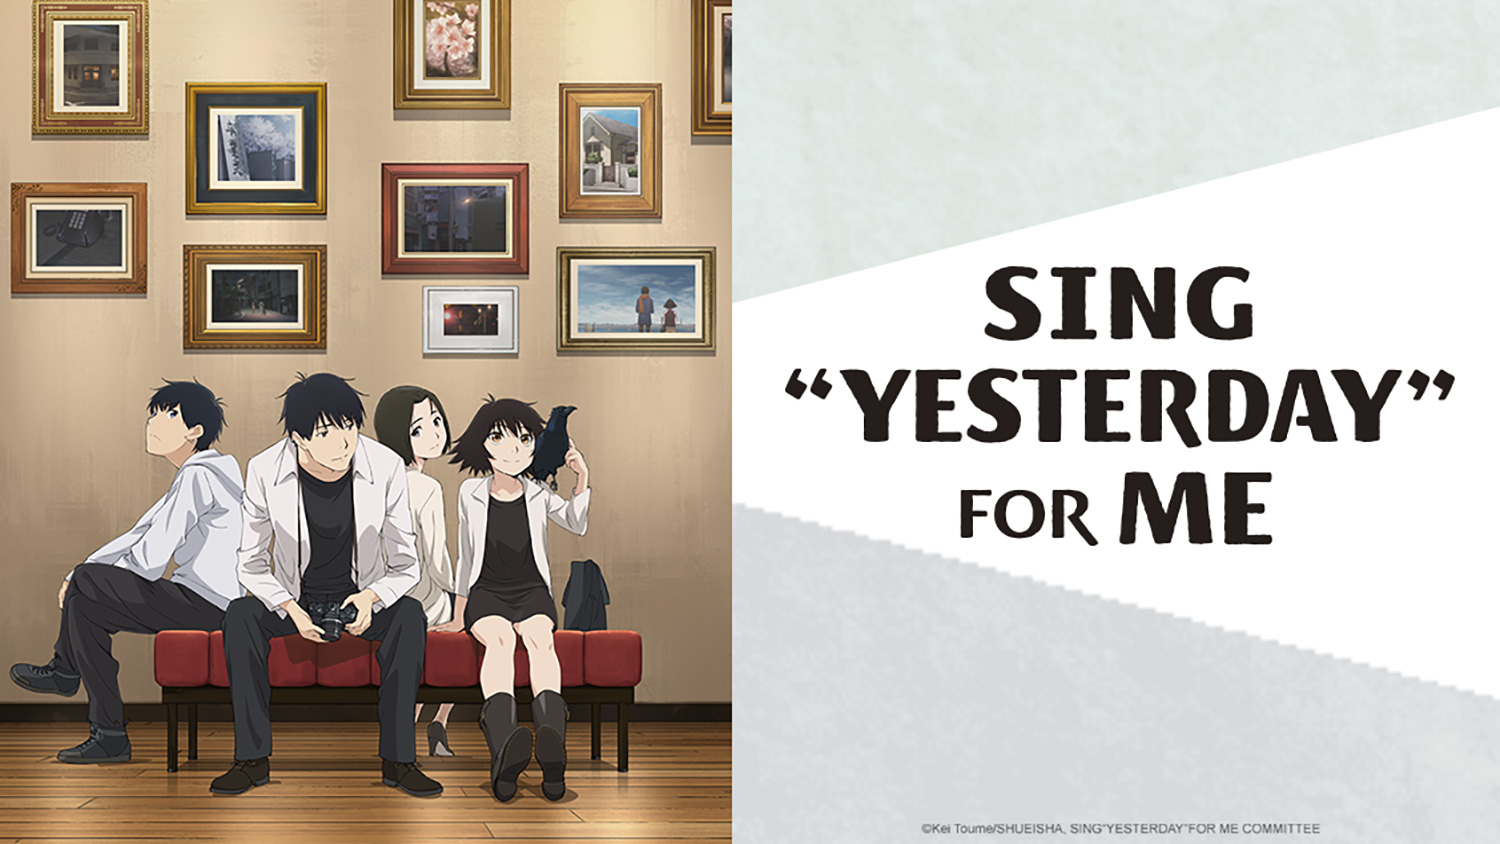 Yesterday i saw a car. Sing yesterday. Sing me yesterday. Sing for me yesterday Возраст. Sing yesterday for me Manga Cover.